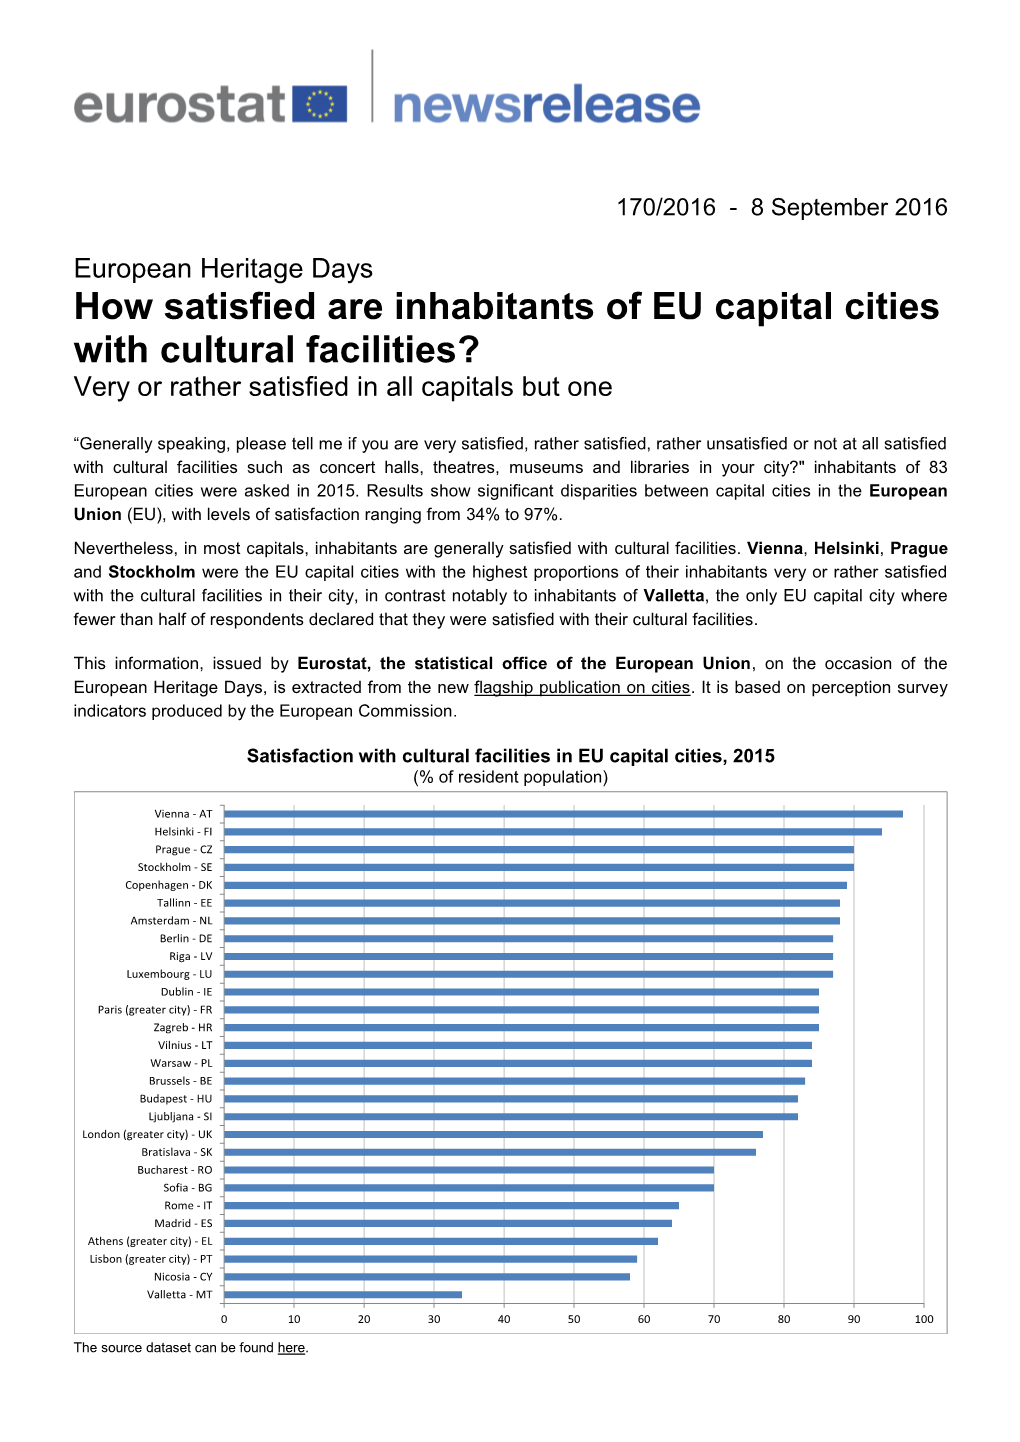 How Satisfied Are Inhabitants of EU Capital Cities with Cultural Facilities? Very Or Rather Satisfied in All Capitals but One